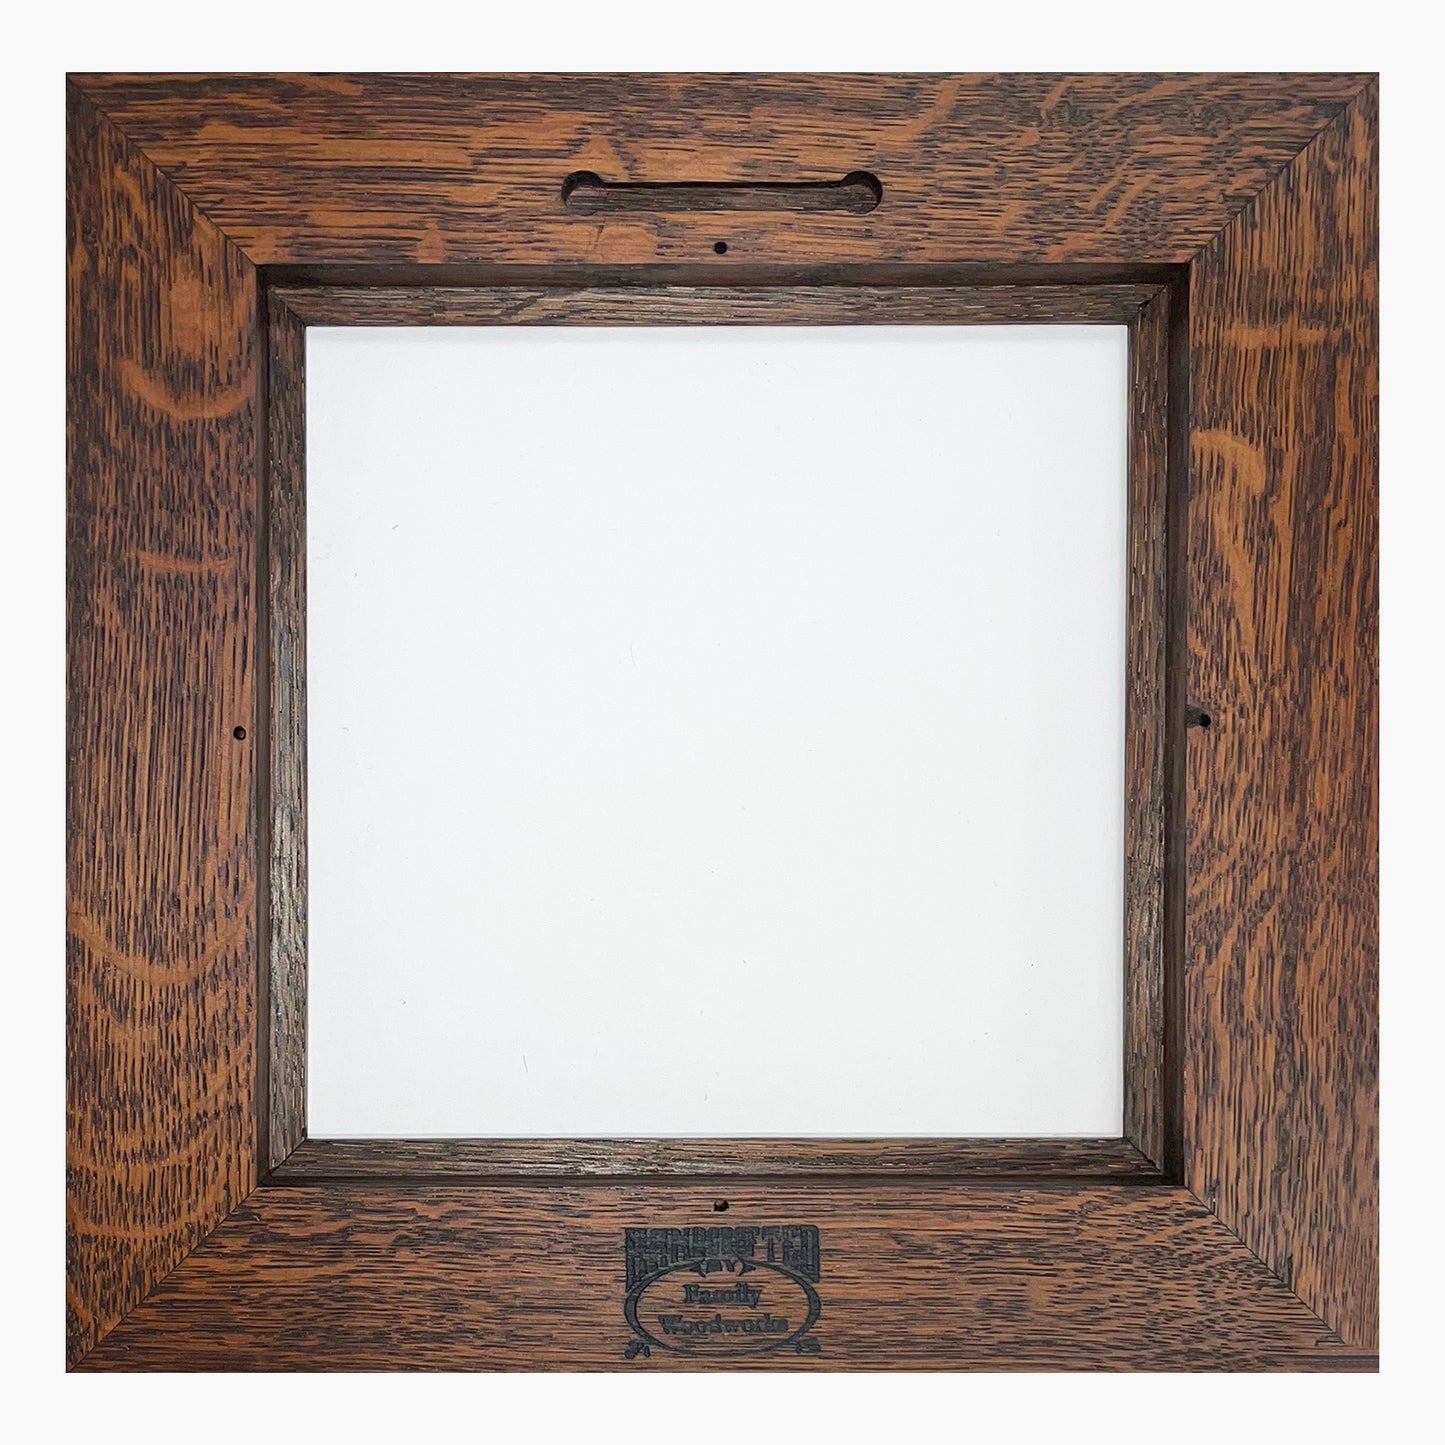 Quarter-Sawn Oak Frame - 6 x 6 in.  Arts and Crafts frame for Motawi and Pewabic Pottery Tiles.